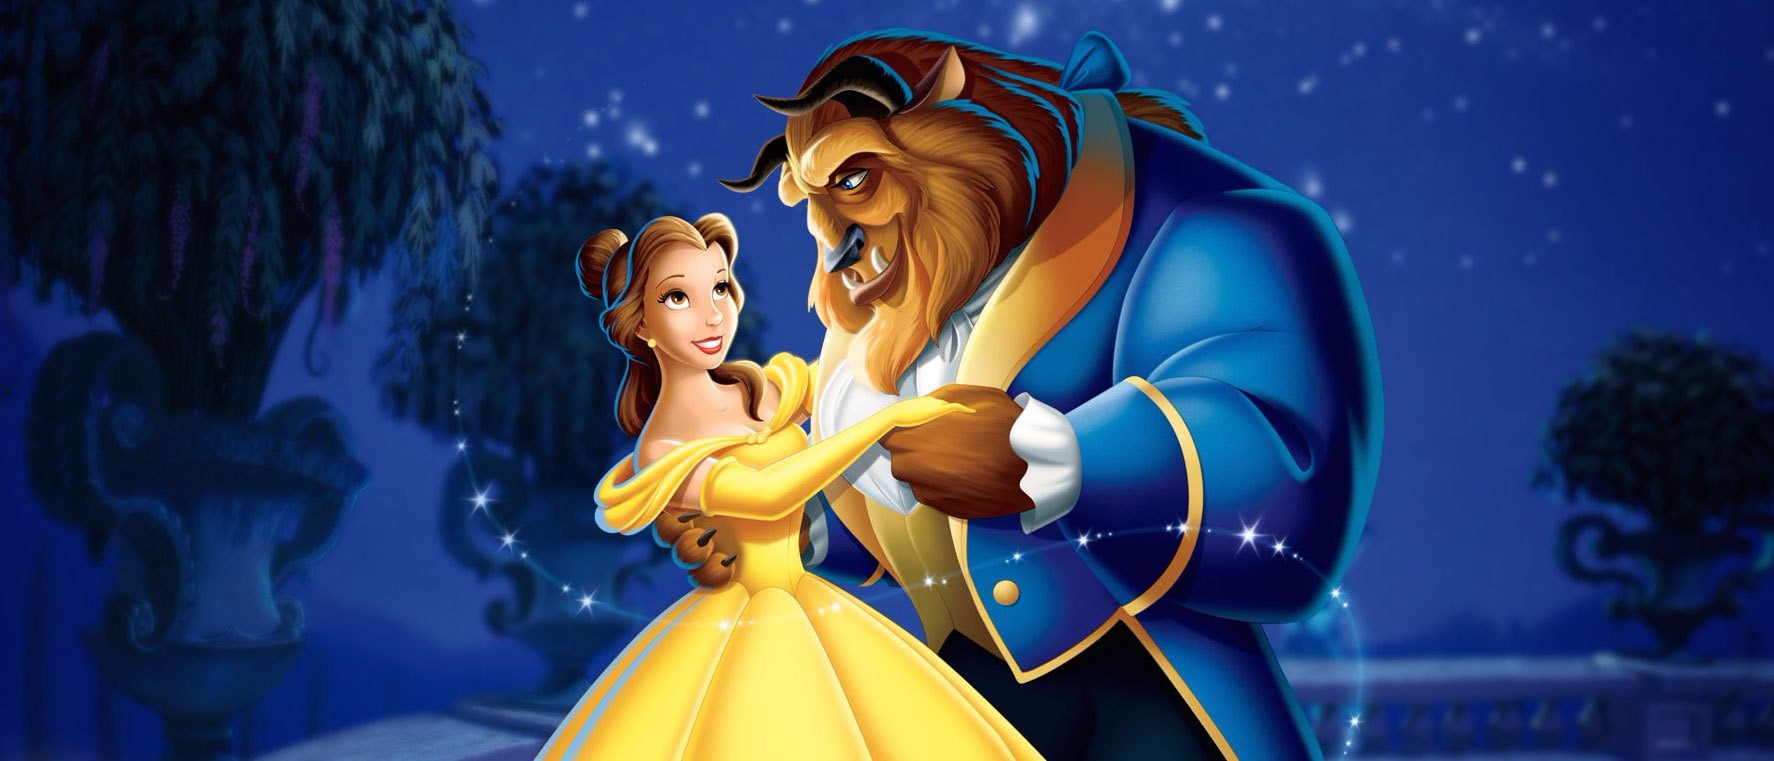 Disney fans see romance bloom in "Beauty and the Beast" trailer